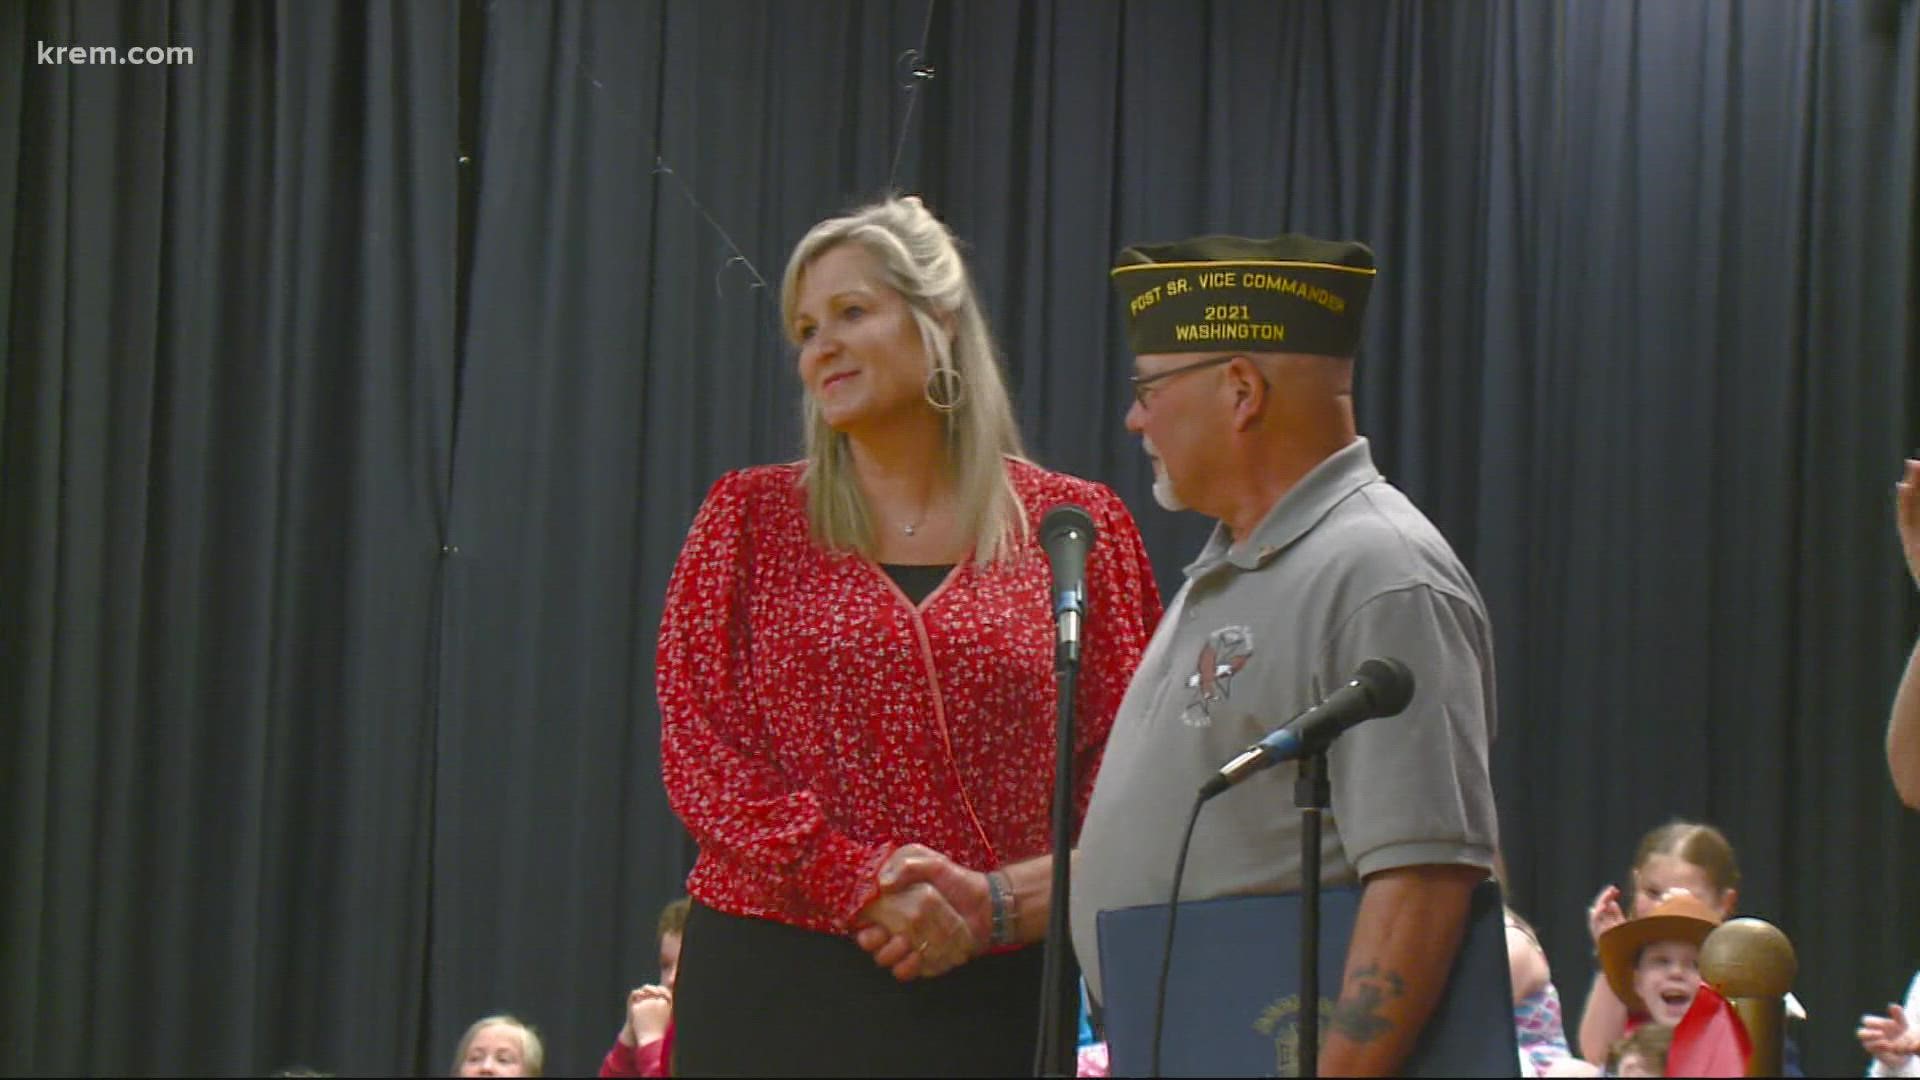 Cindy Bergdahl is not only a great teacher but she also worked hard to support local veterans and current service members.